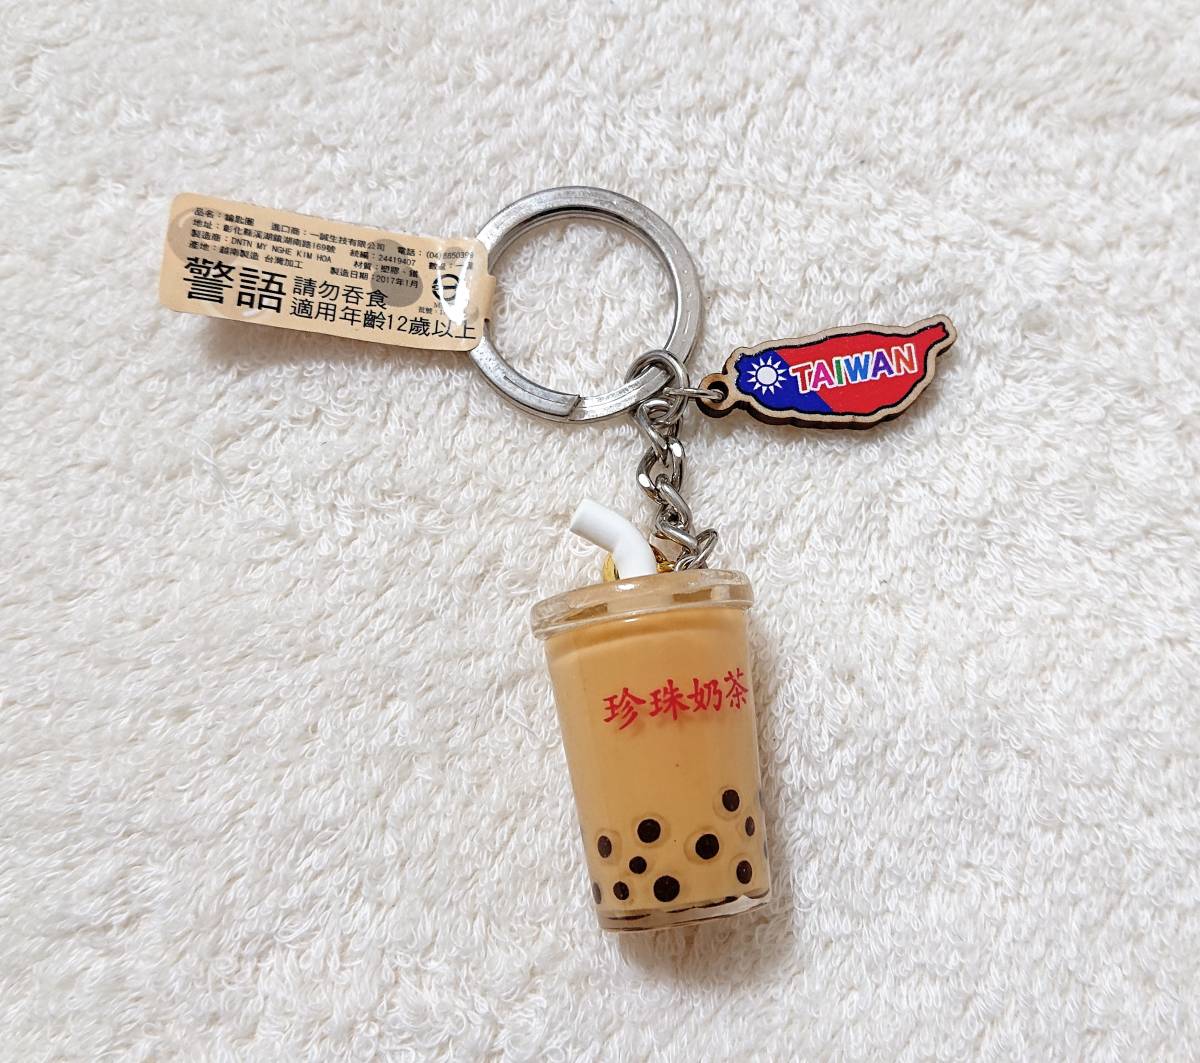 tapioka white tea key holder strap Taiwan limitation cup. height approximately 3.2cm real new goods unused 